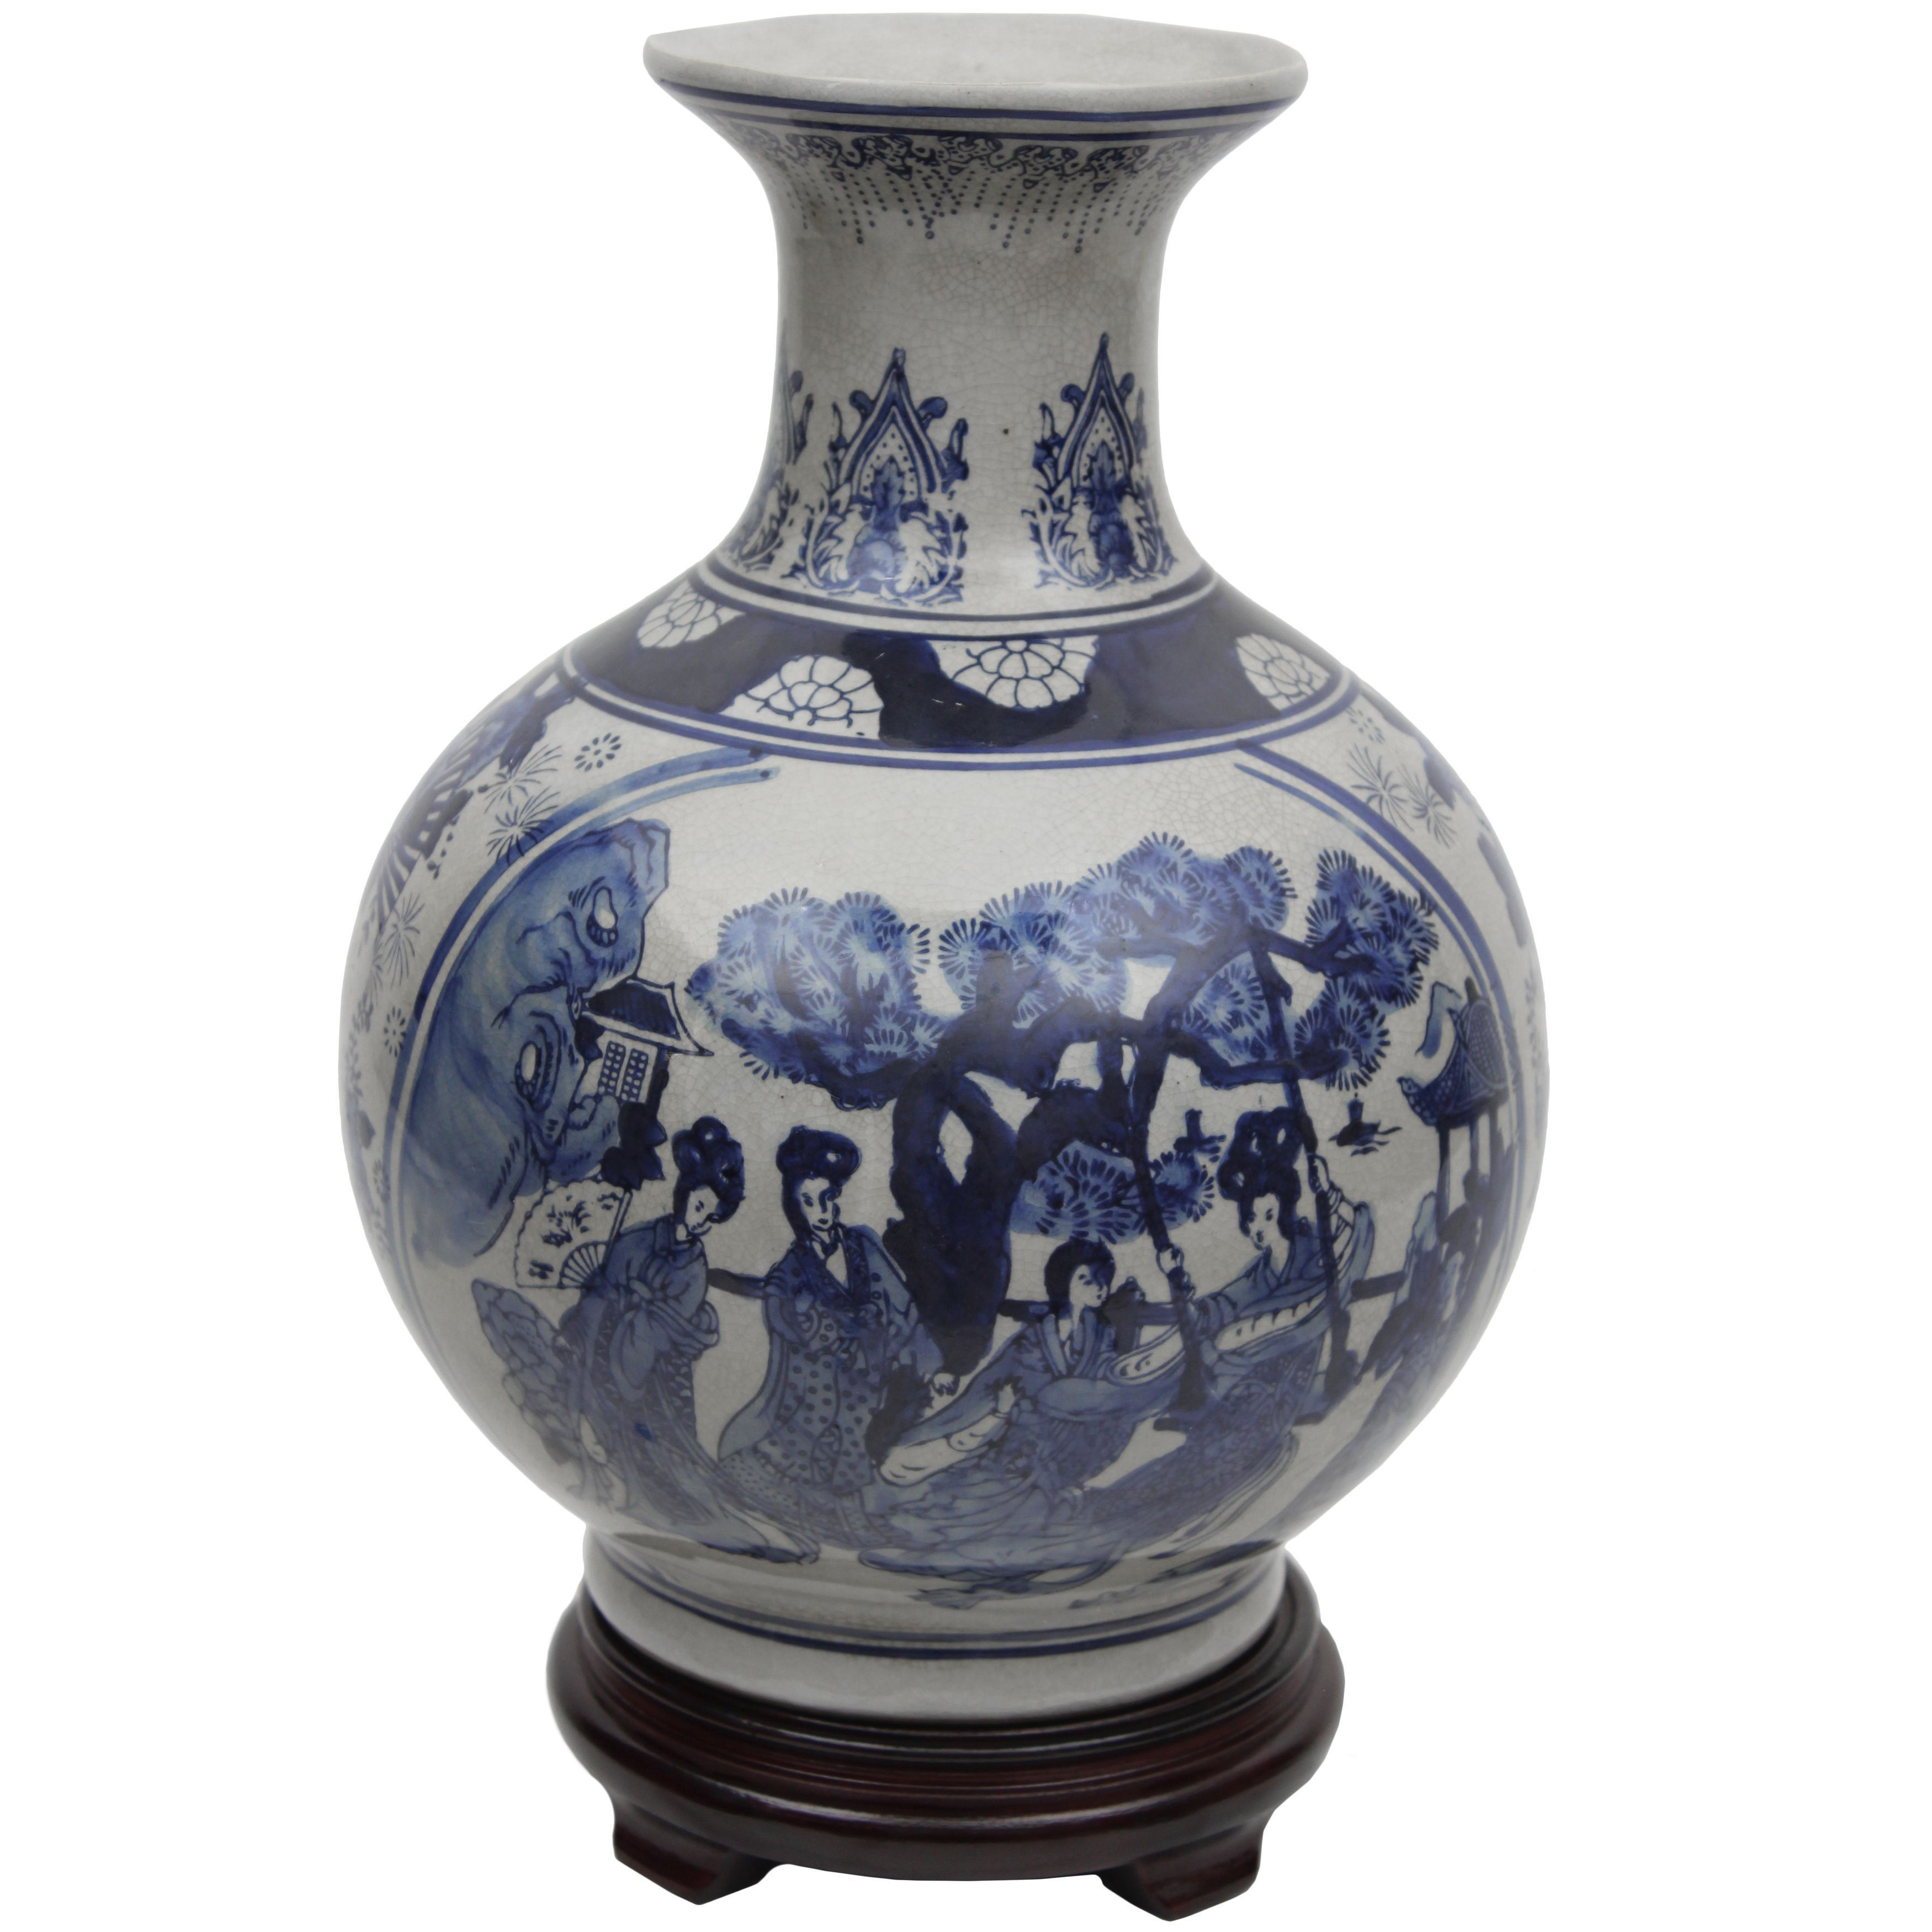 27 Spectacular Fine China Vase 2024 free download fine china vase of photos of white pottery vase vases artificial plants collection for handmade 14 inch blue and white porcelain vase china size medium